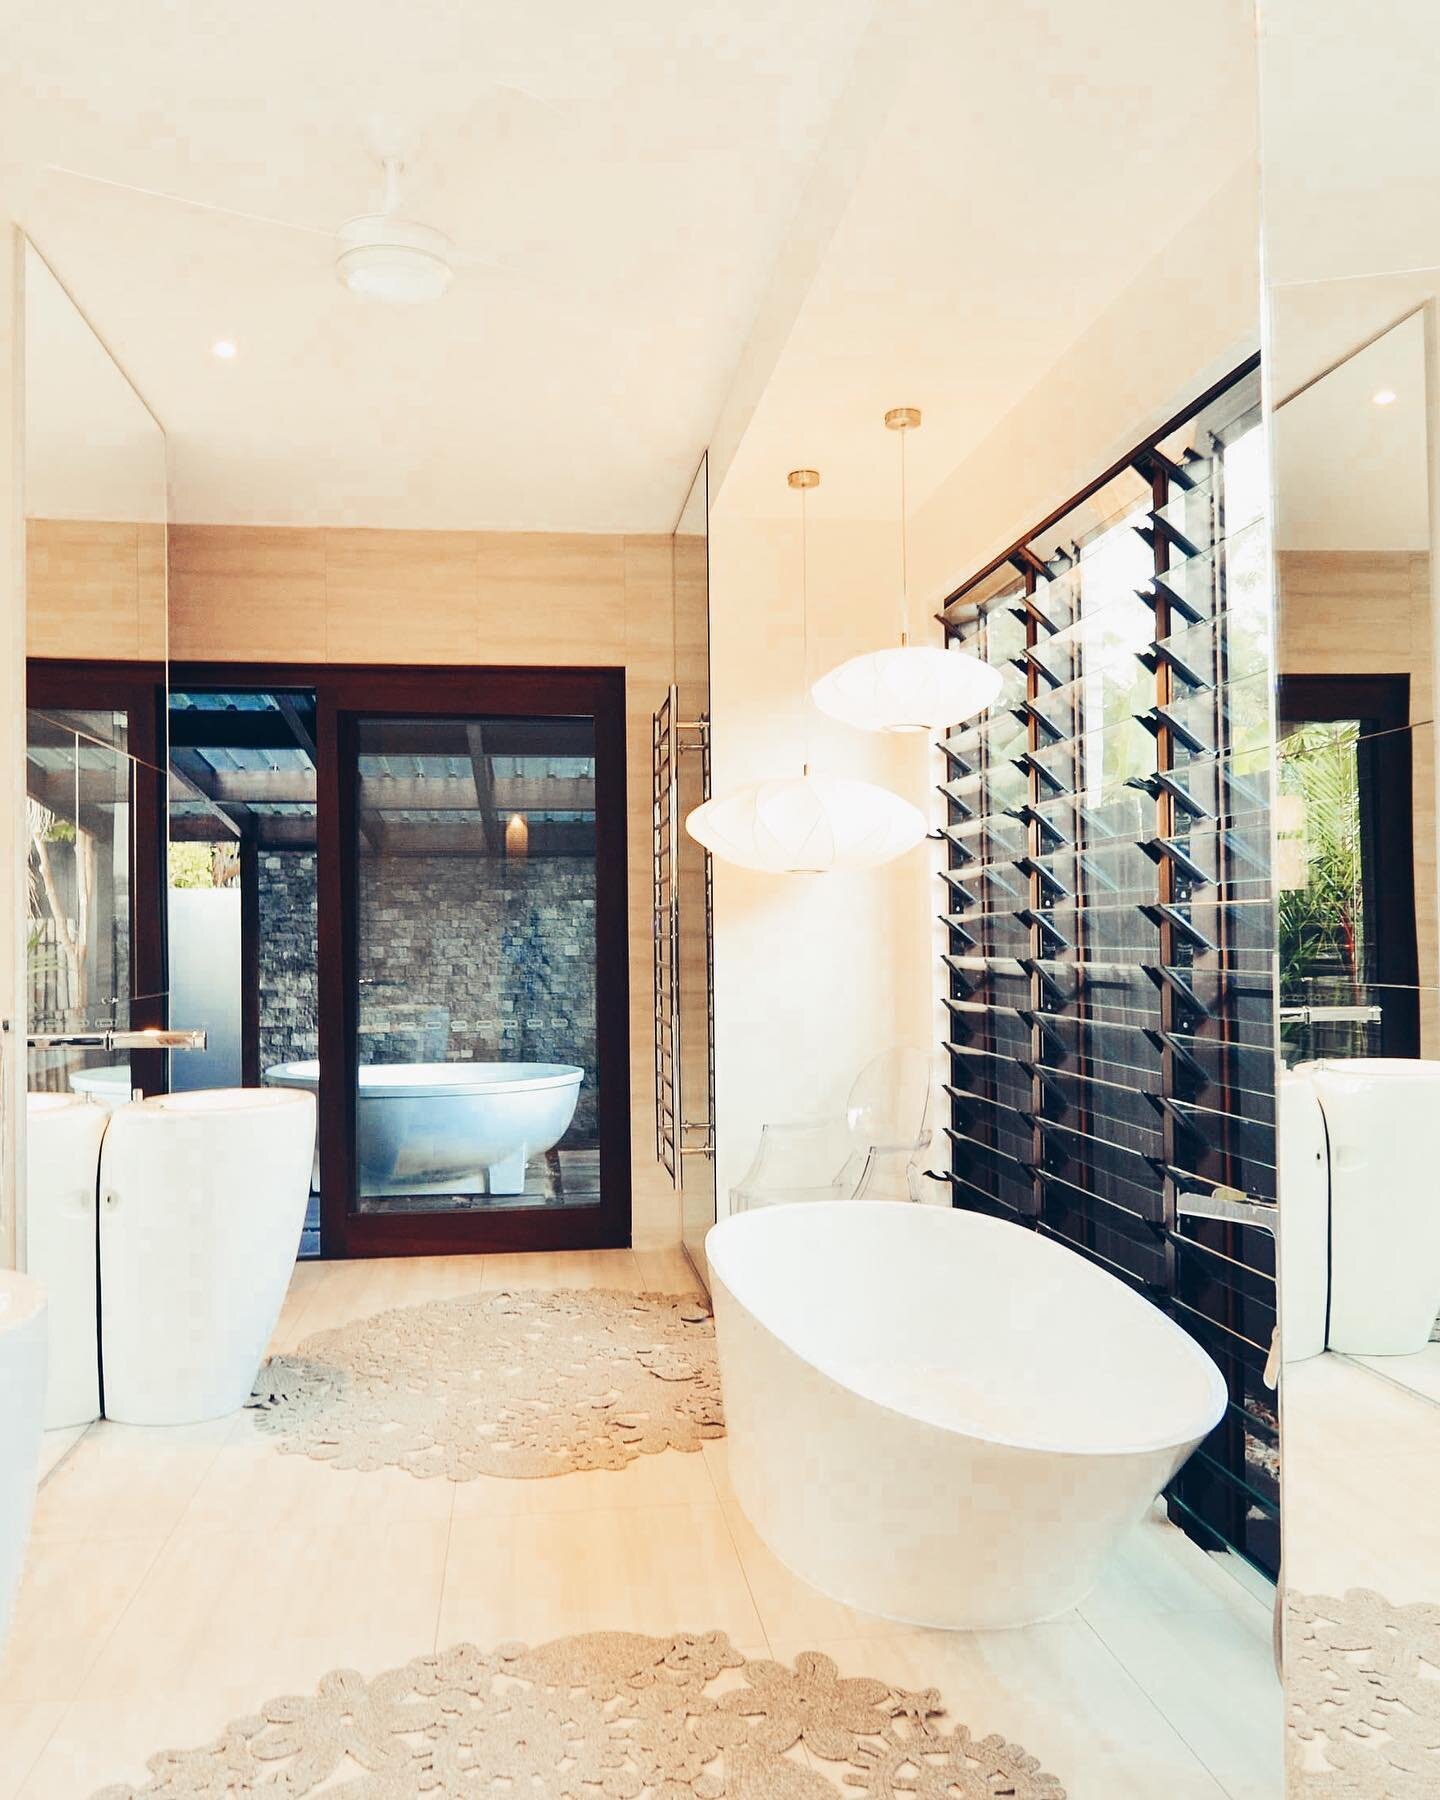 A freestanding bath is an excellent feature for your bathroom, and who doesn&rsquo;t love a bubble bath 🧖🏼&zwj;♀️
&bull;⠀⠀⠀⠀⠀⠀⠀⠀⠀
&bull;⠀⠀⠀⠀⠀⠀⠀⠀⠀
&bull;⠀⠀⠀⠀⠀⠀⠀⠀⠀
&bull;⠀⠀⠀⠀⠀⠀⠀⠀⠀
#architecture #design #designer #tropical #luxurydesign #luxuryhomes #